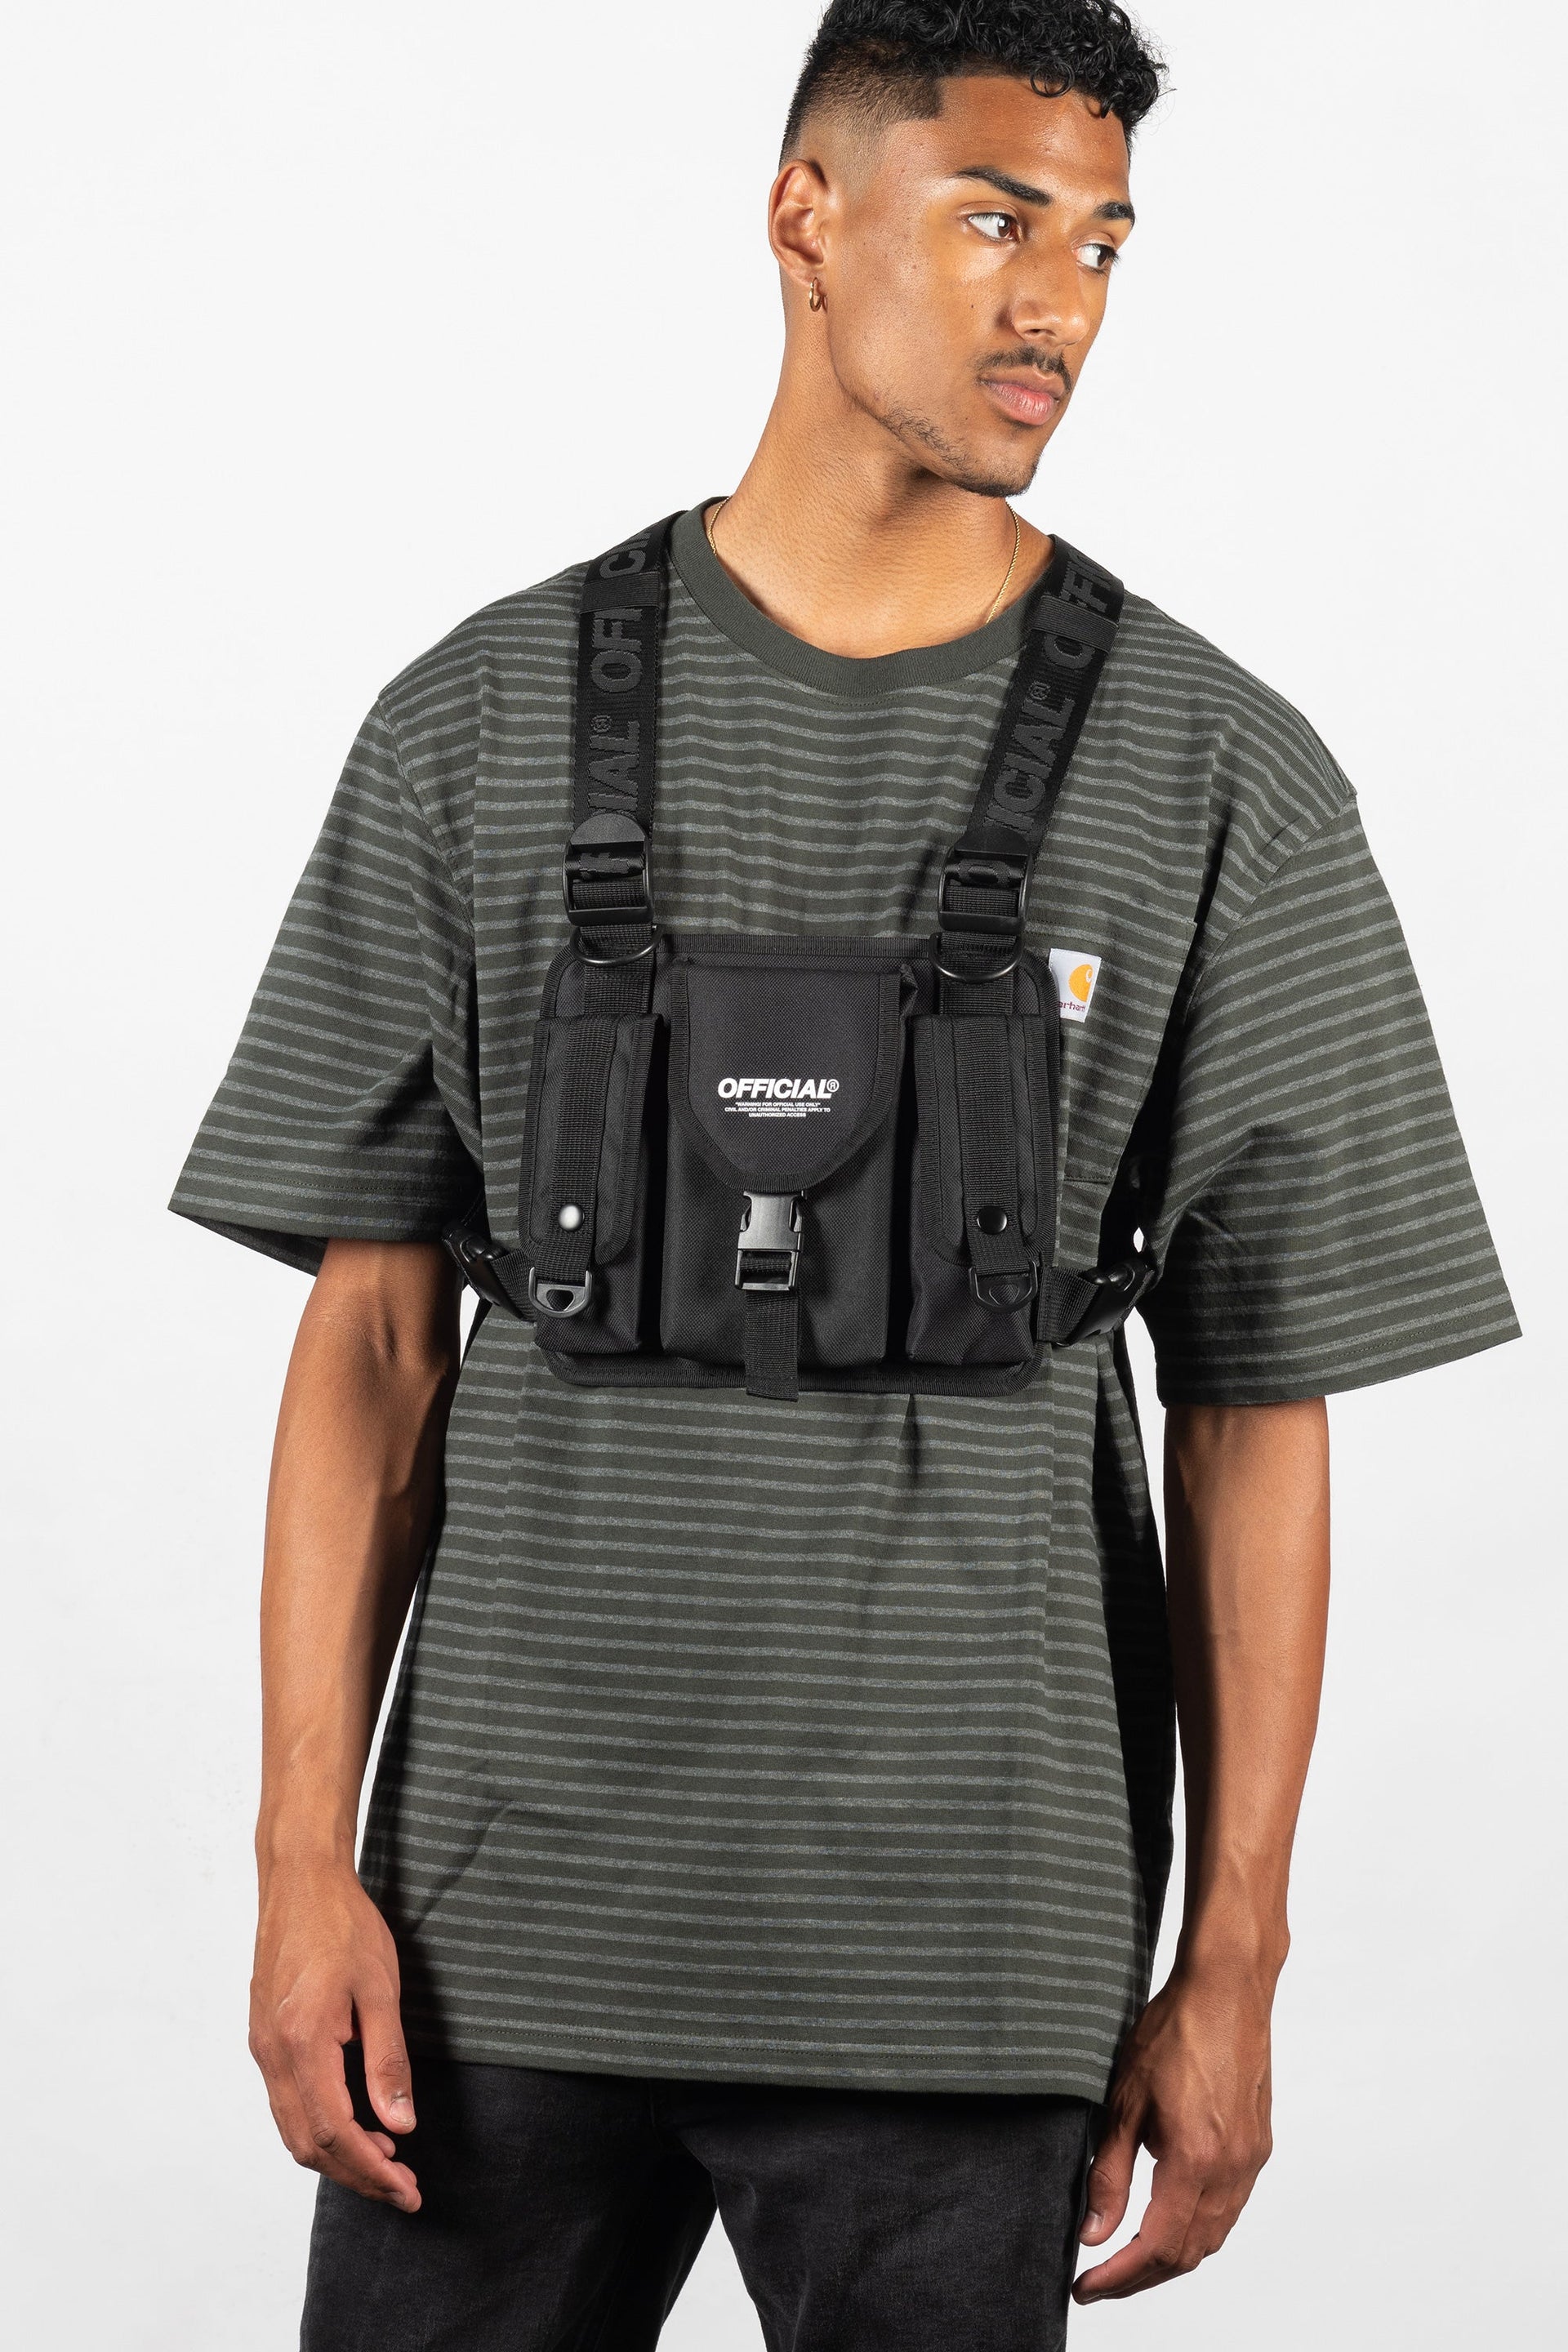 The Streetwear Tactics Chest Bag Utility Vest | Official Black being worn